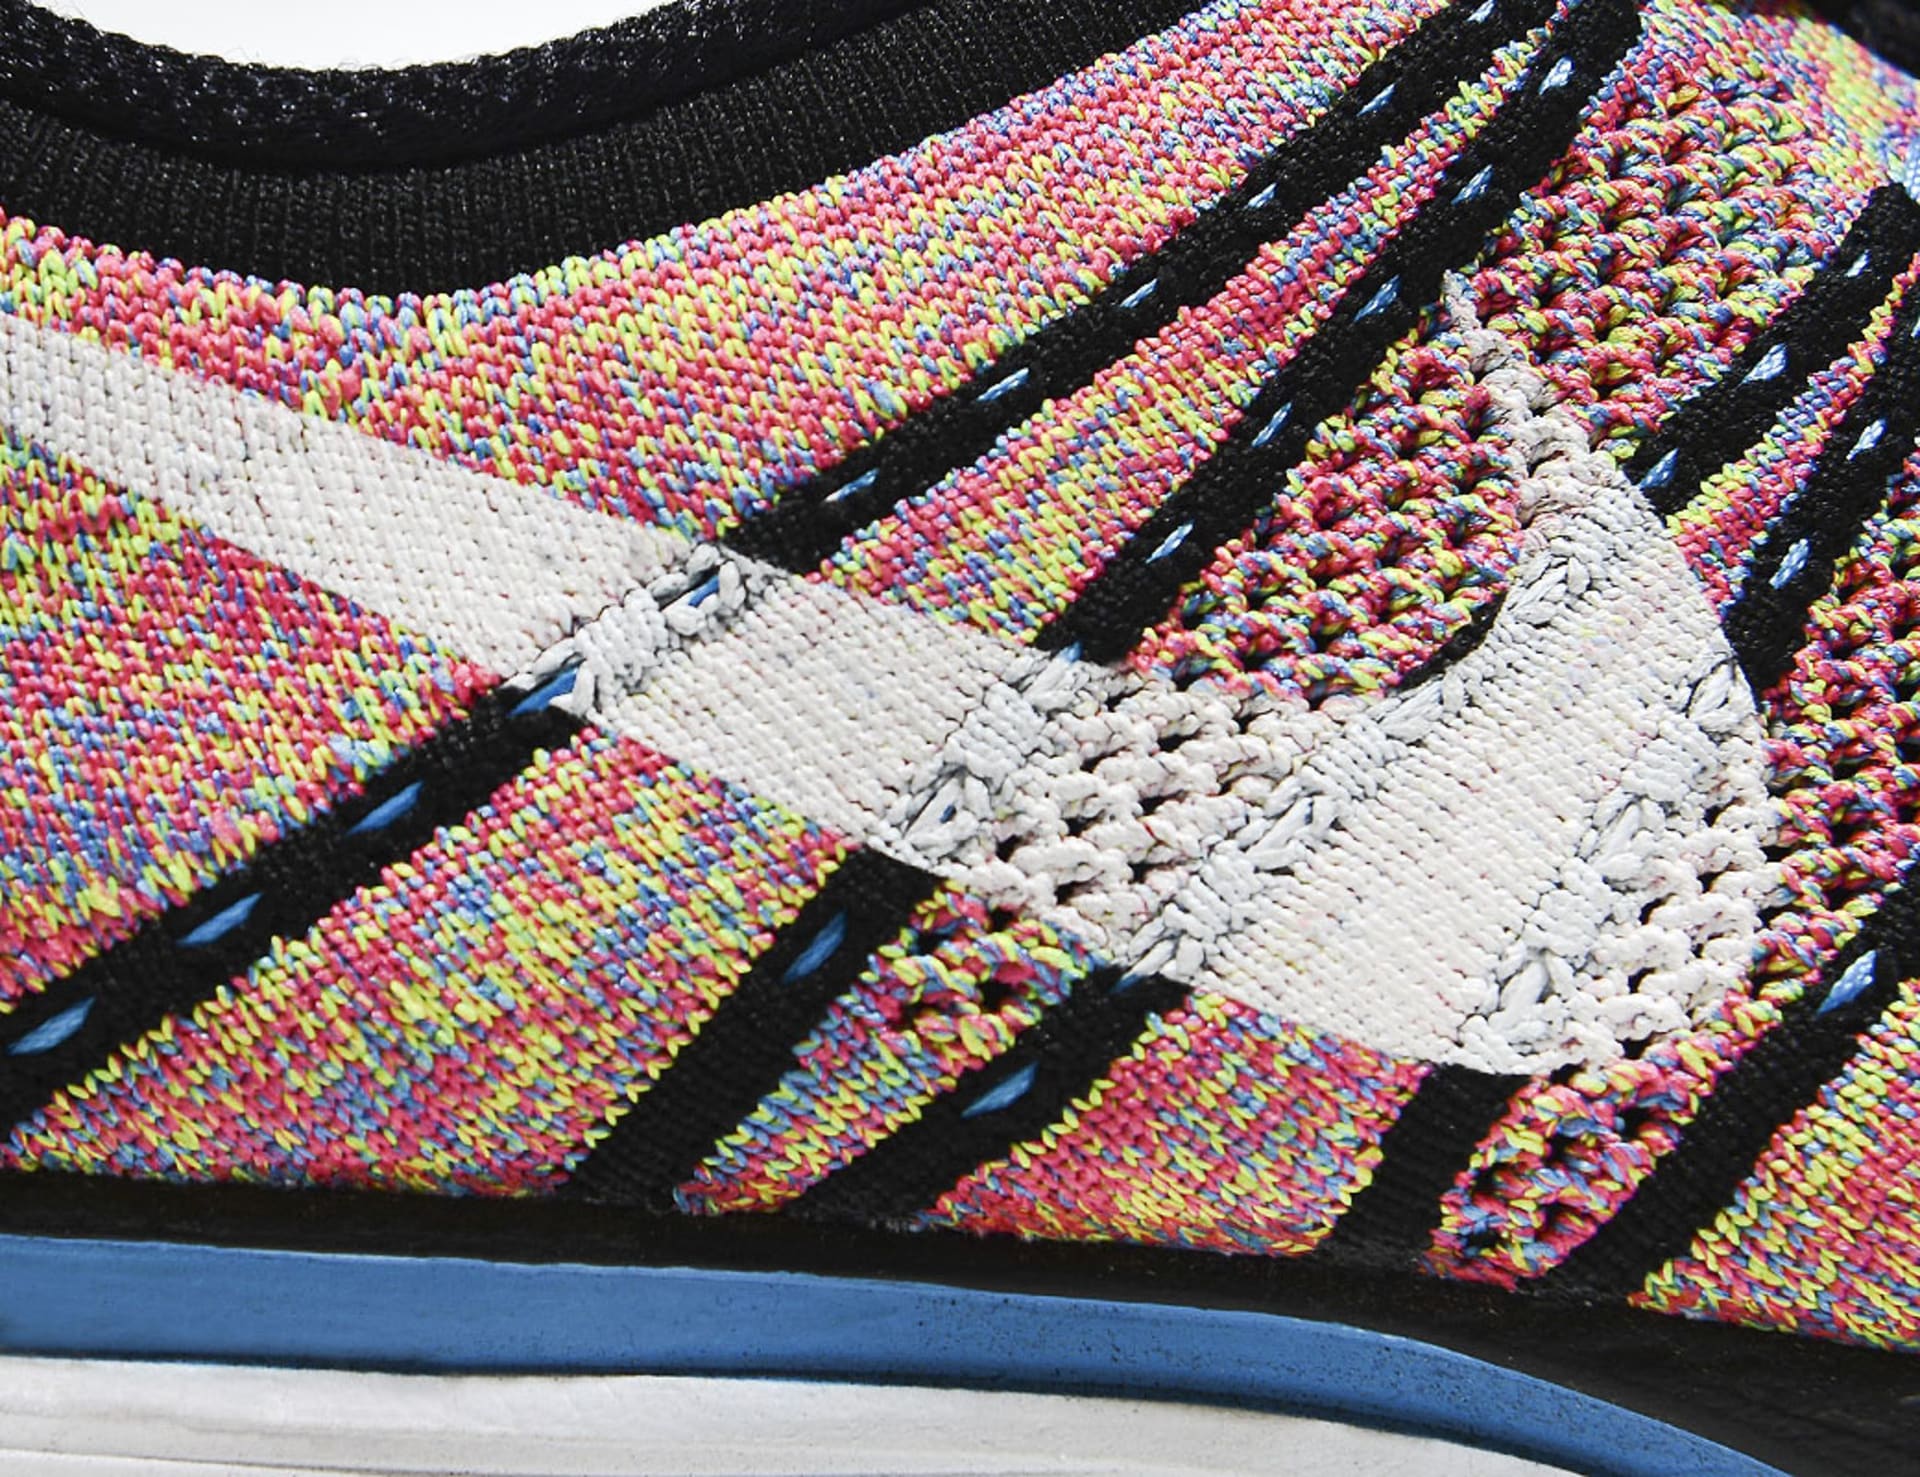 flyknit technology shoes